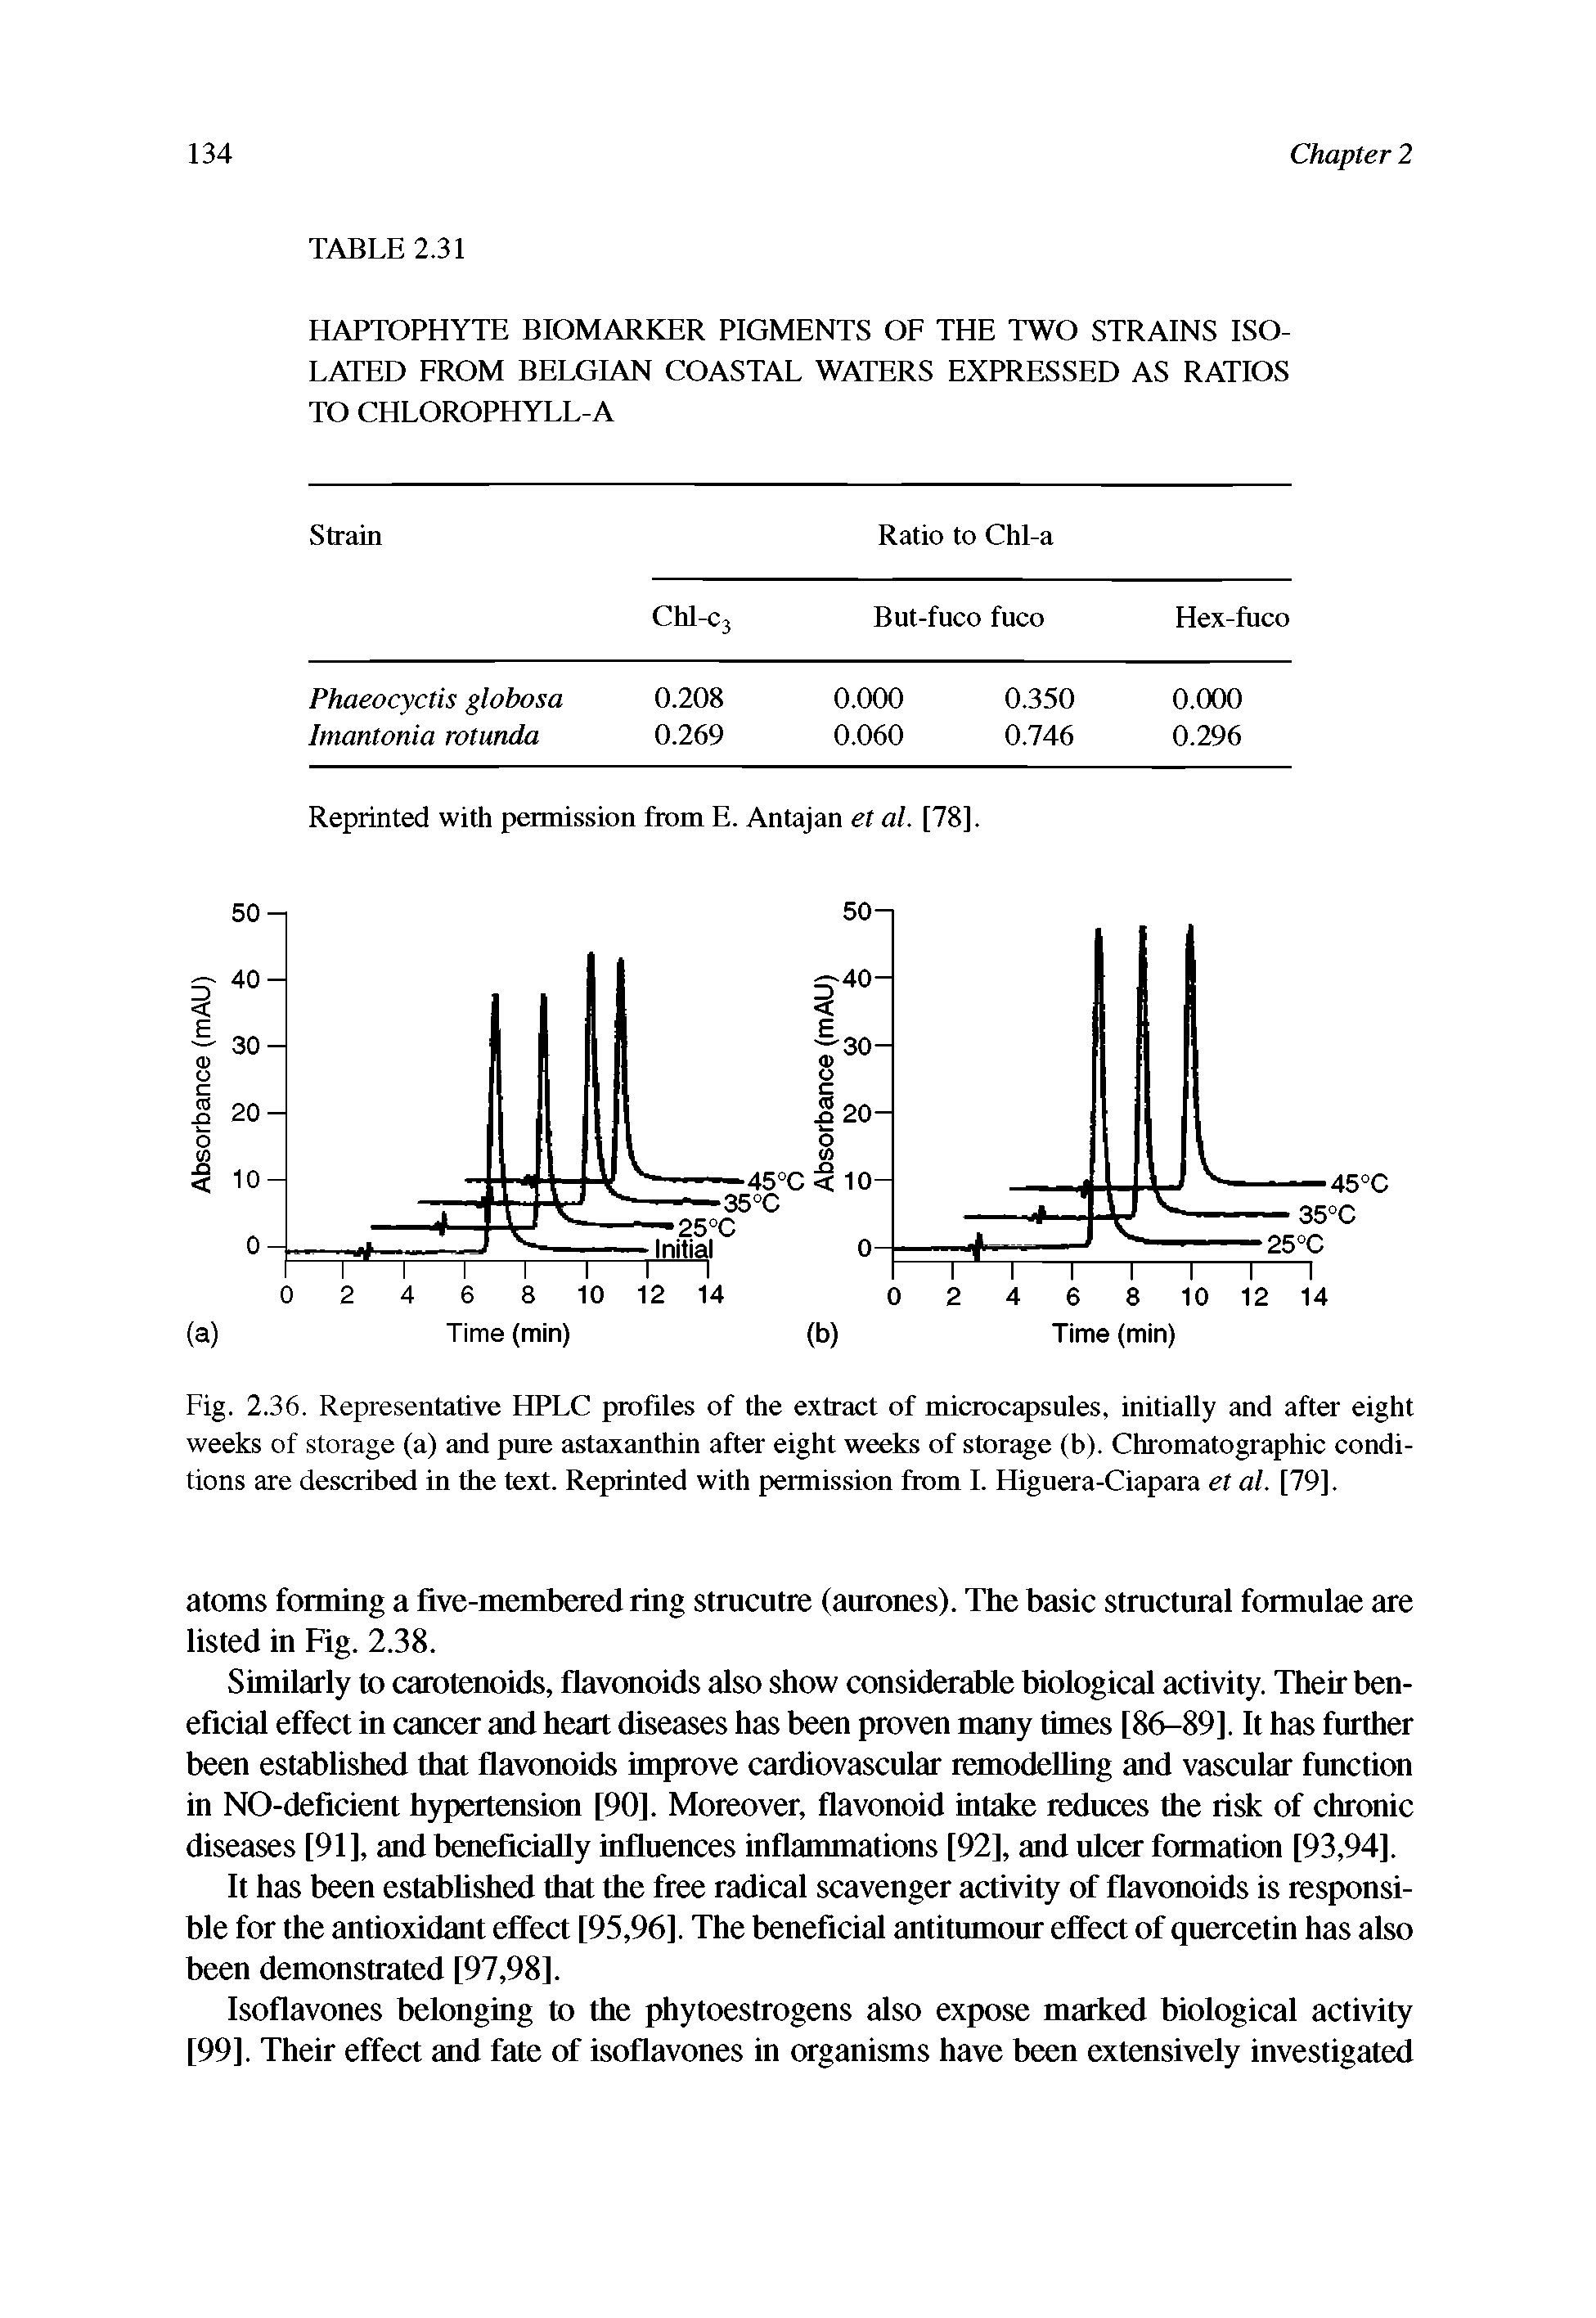 Fig. 2.36. Representative HPLC profiles of the extract of microcapsules, initially and after eight weeks of storage (a) and pure astaxanthin after eight weeks of storage (b). Chromatographic conditions are described in the text. Reprinted with permission from I. Higuera-Ciapara et al. [79].